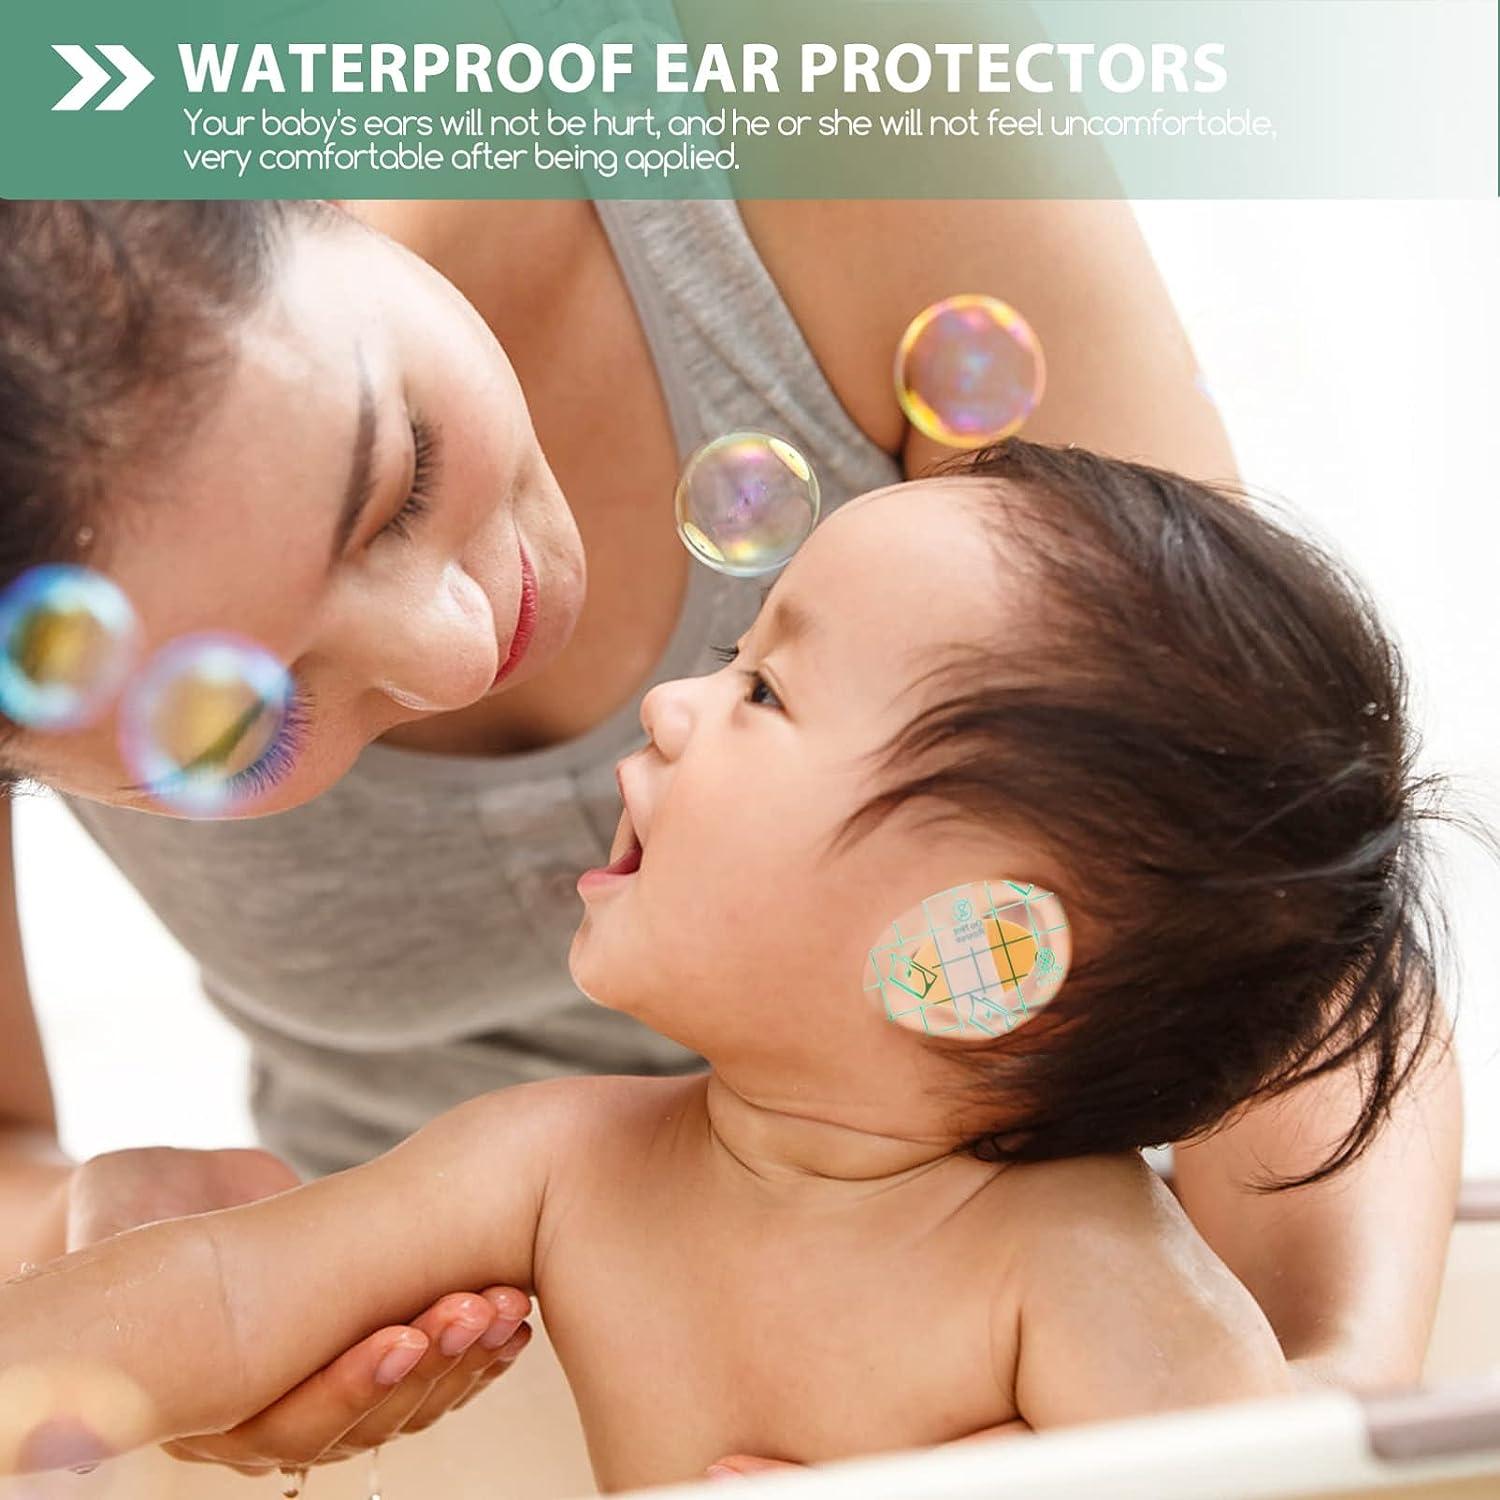 Ear covers for bathing : r/ofcoursethatsathing